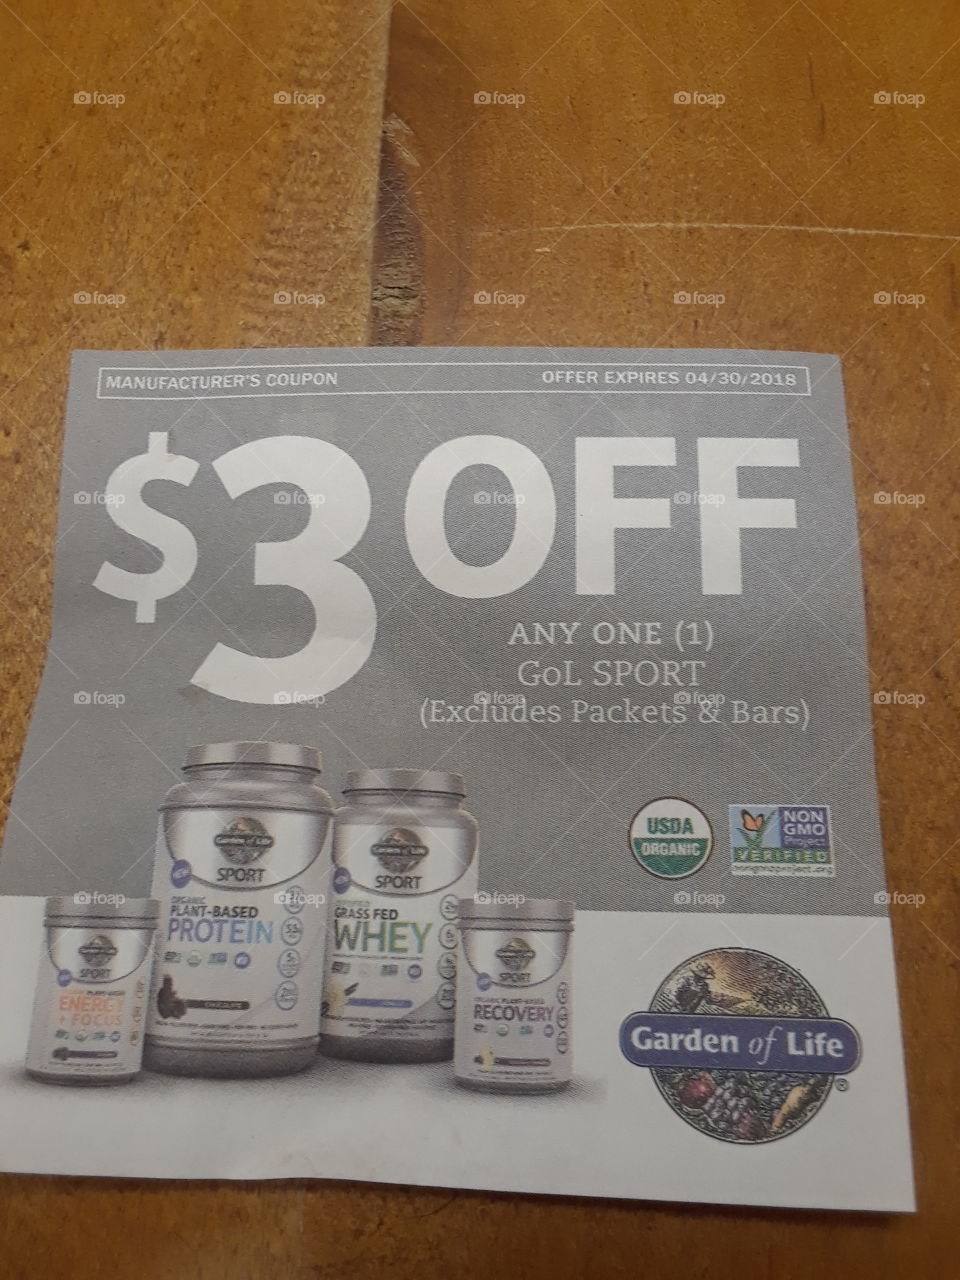 $3 off protein powder here at the arore5.A little discount is cool and something to go with.Better then the regular price.Il take anything that i can get with certain deals.Its all good.Deals help alot with life and go along way.